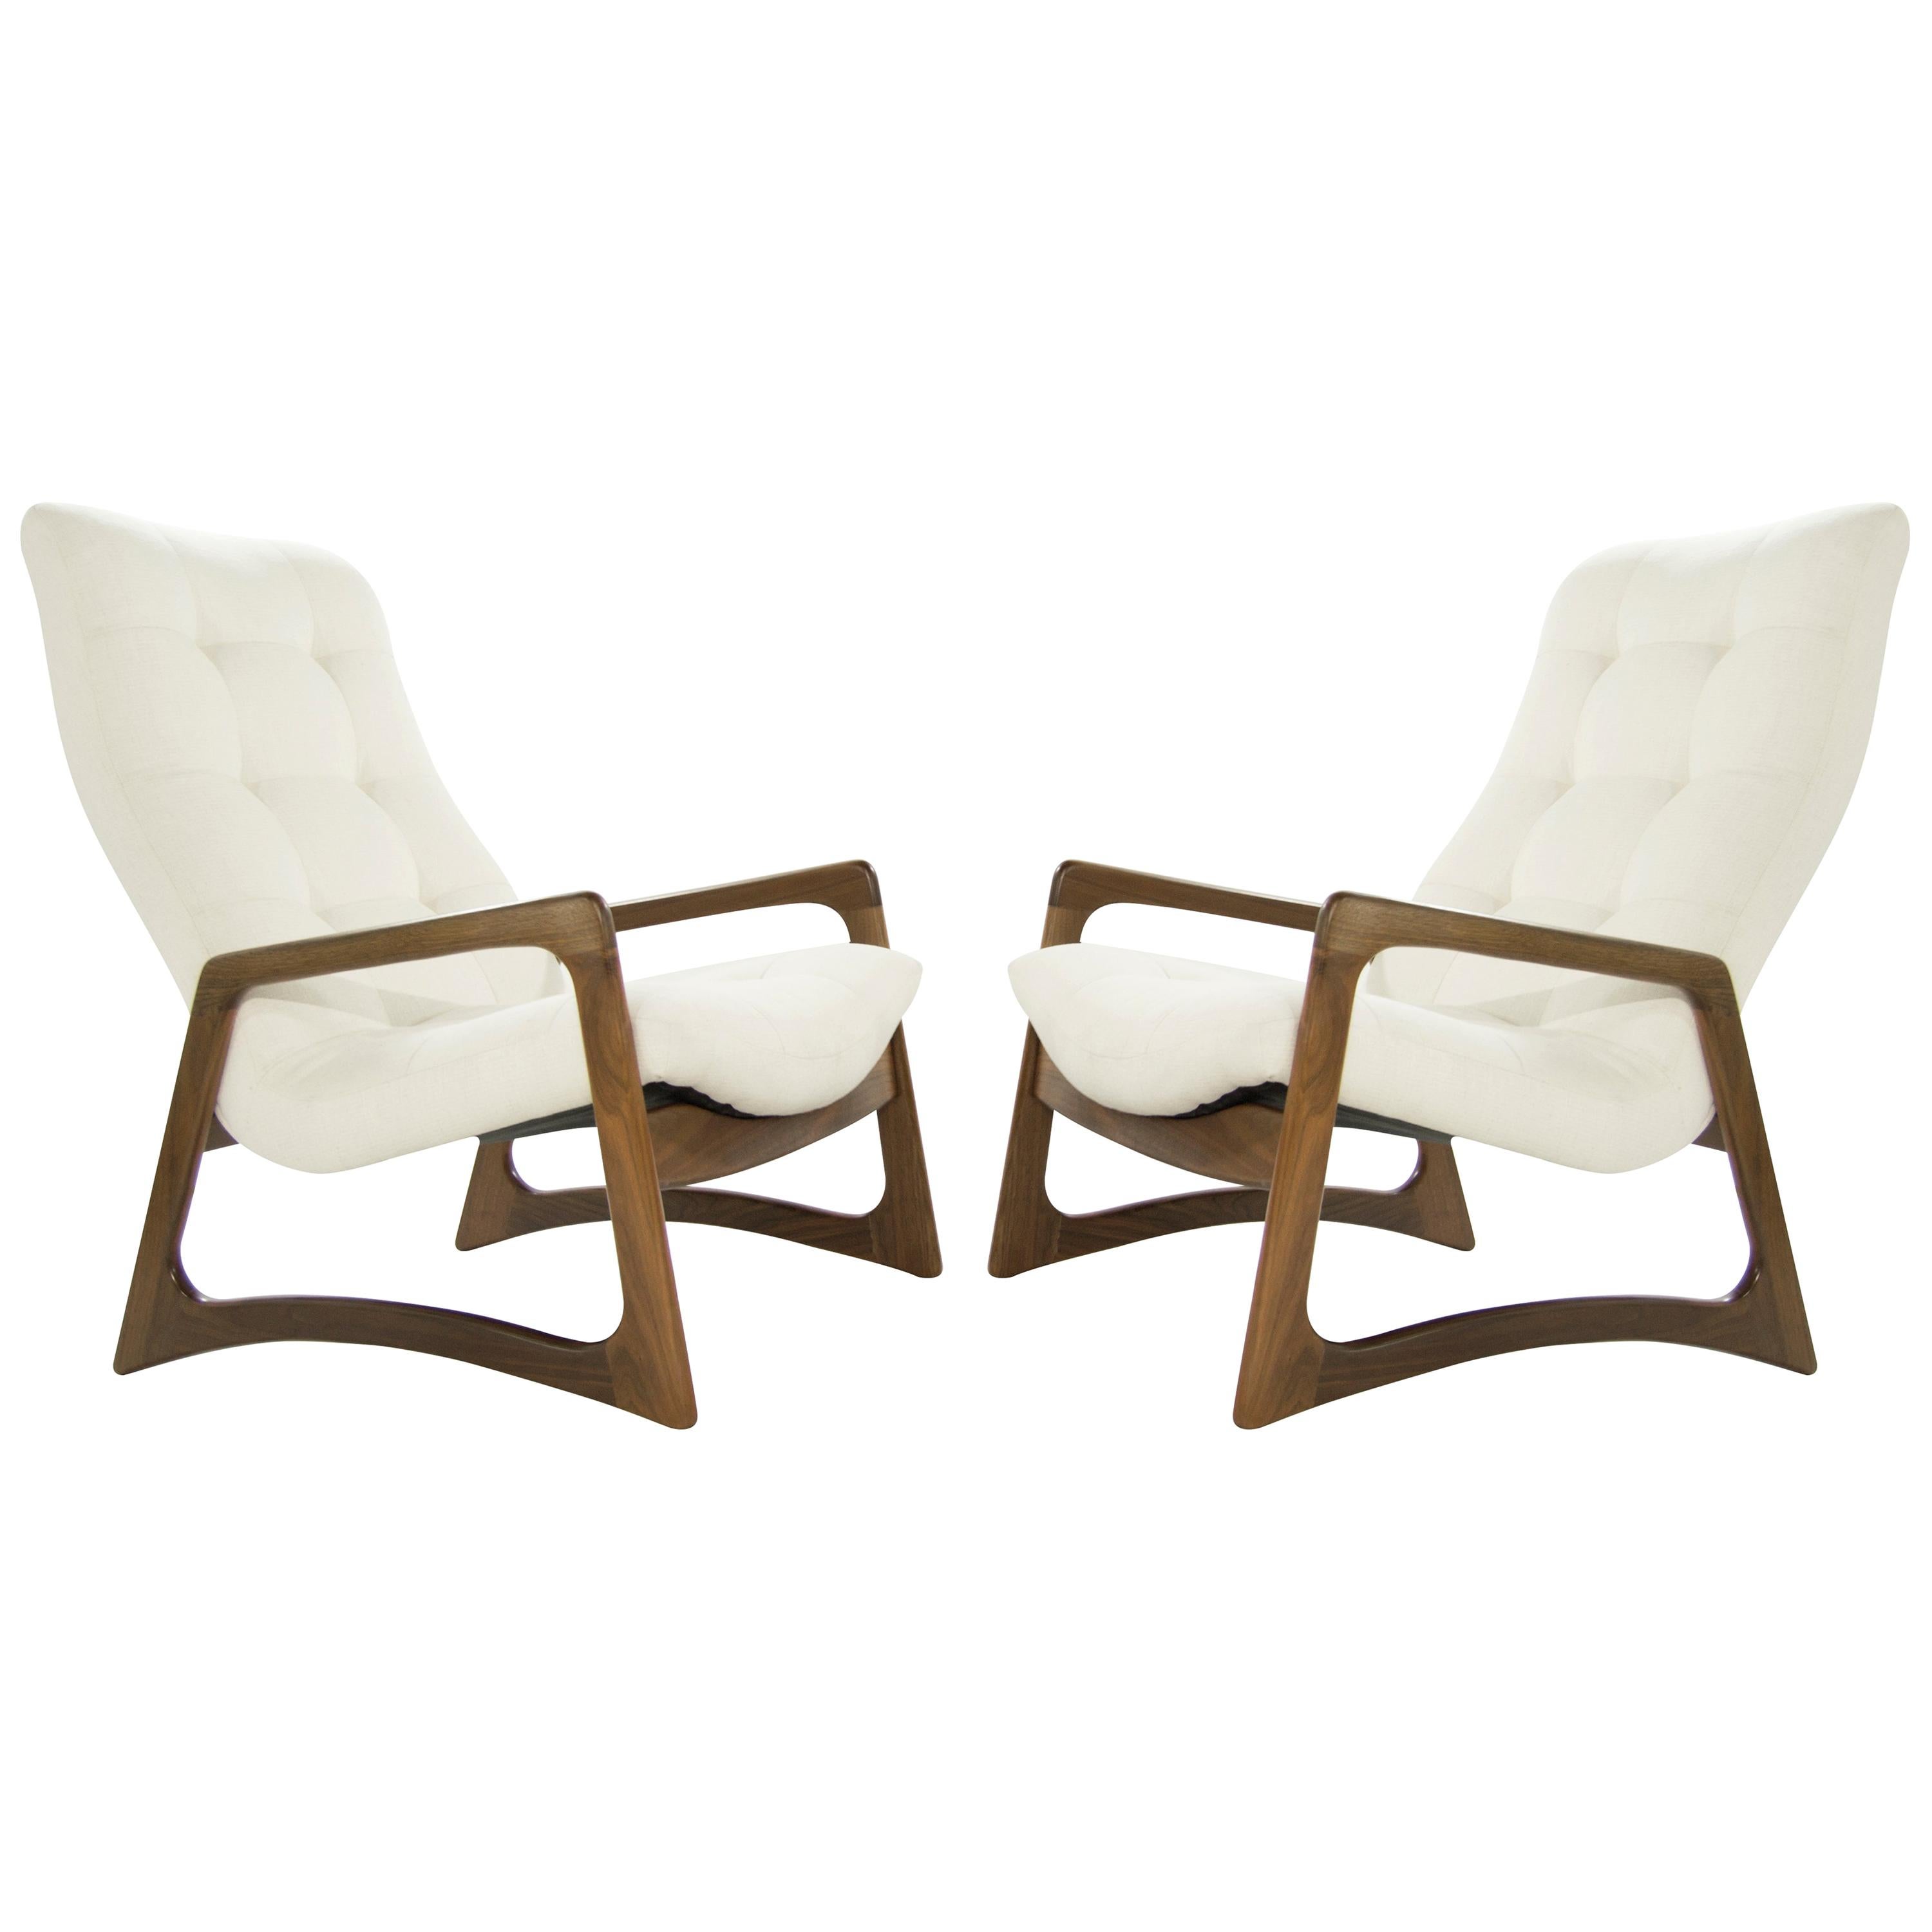 Sculptural Walnut Lounge Chairs by Adrian Pearsall for Craft Associates